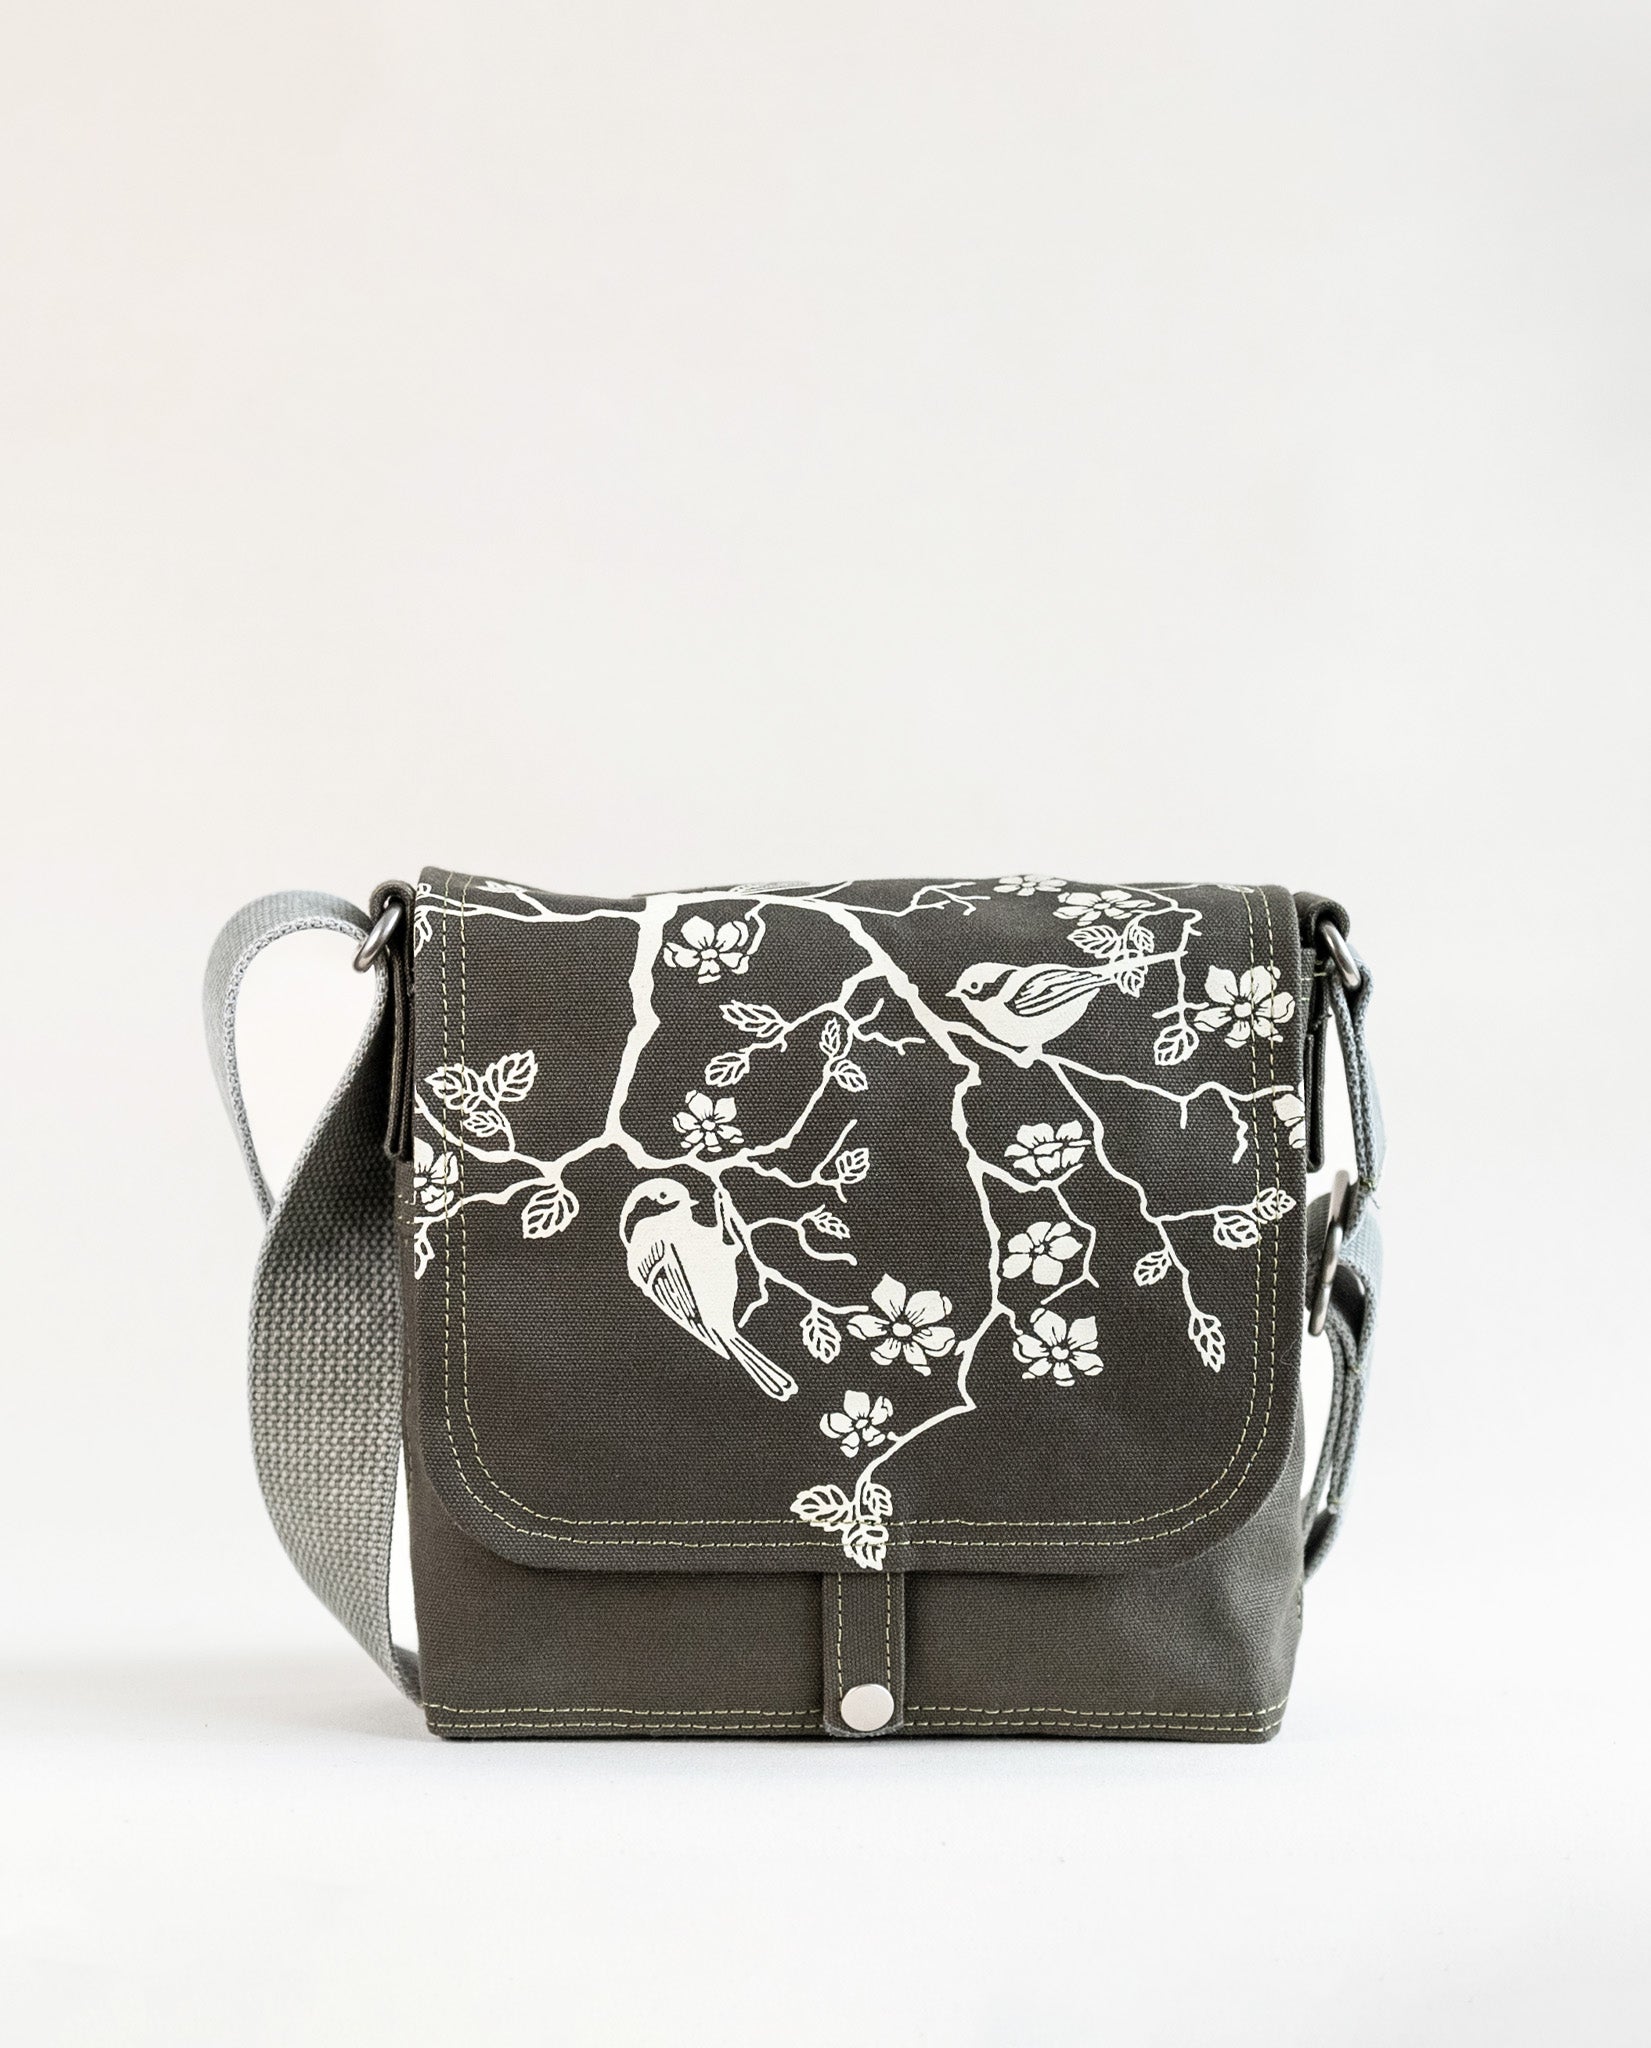 Front exterior of Dock 5’s Chickadee Canvas Mini Messenger Bag in olive featuring art from owner Natalija Walbridge